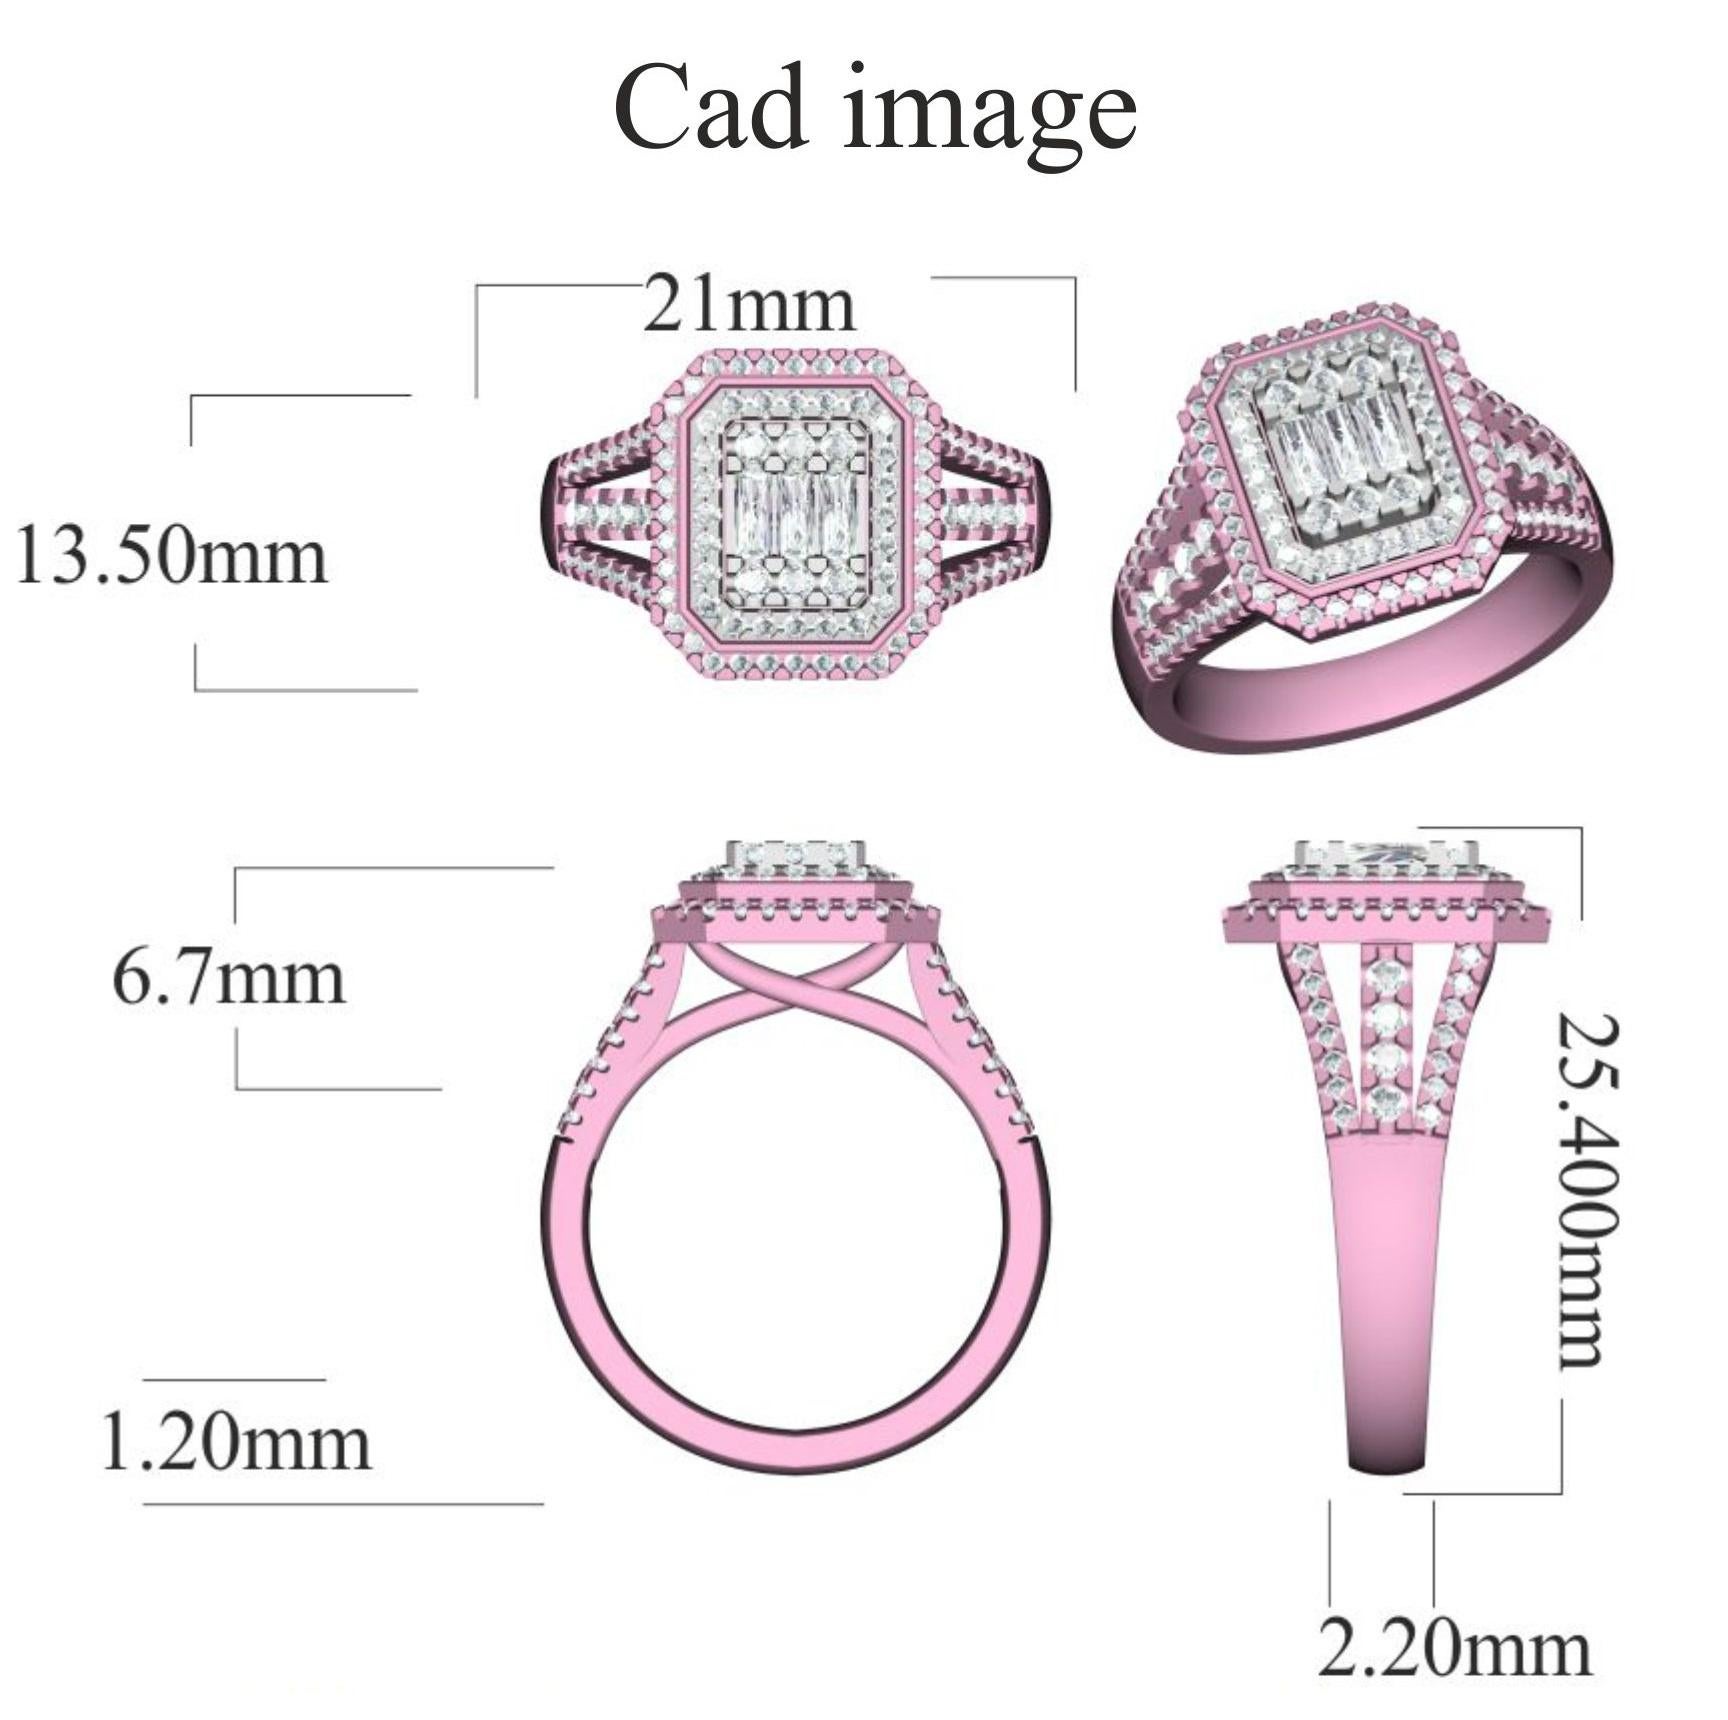 She'll be thrilled with the sparkle of this diamond bridal set. The ring is crafted from 14-karat white gold and features Round Brilliant 102 and Baguette - 3  white diamonds, Micro Prong set, H-I color I2 clarity and a high polish finish complete